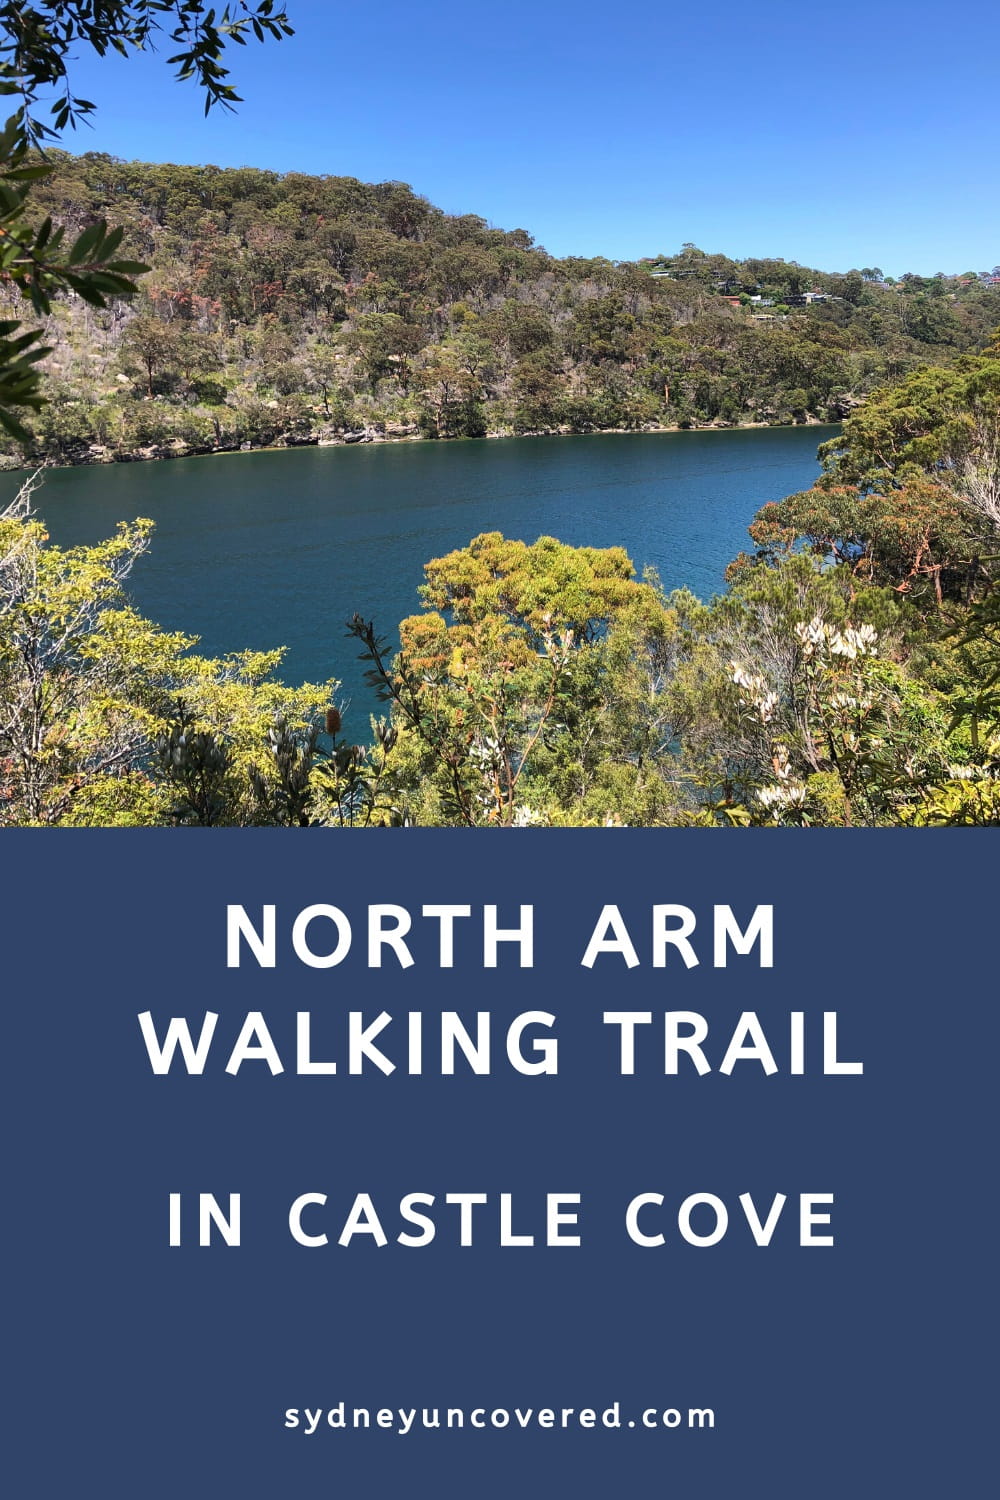 North Arm walking track in Castle Cove